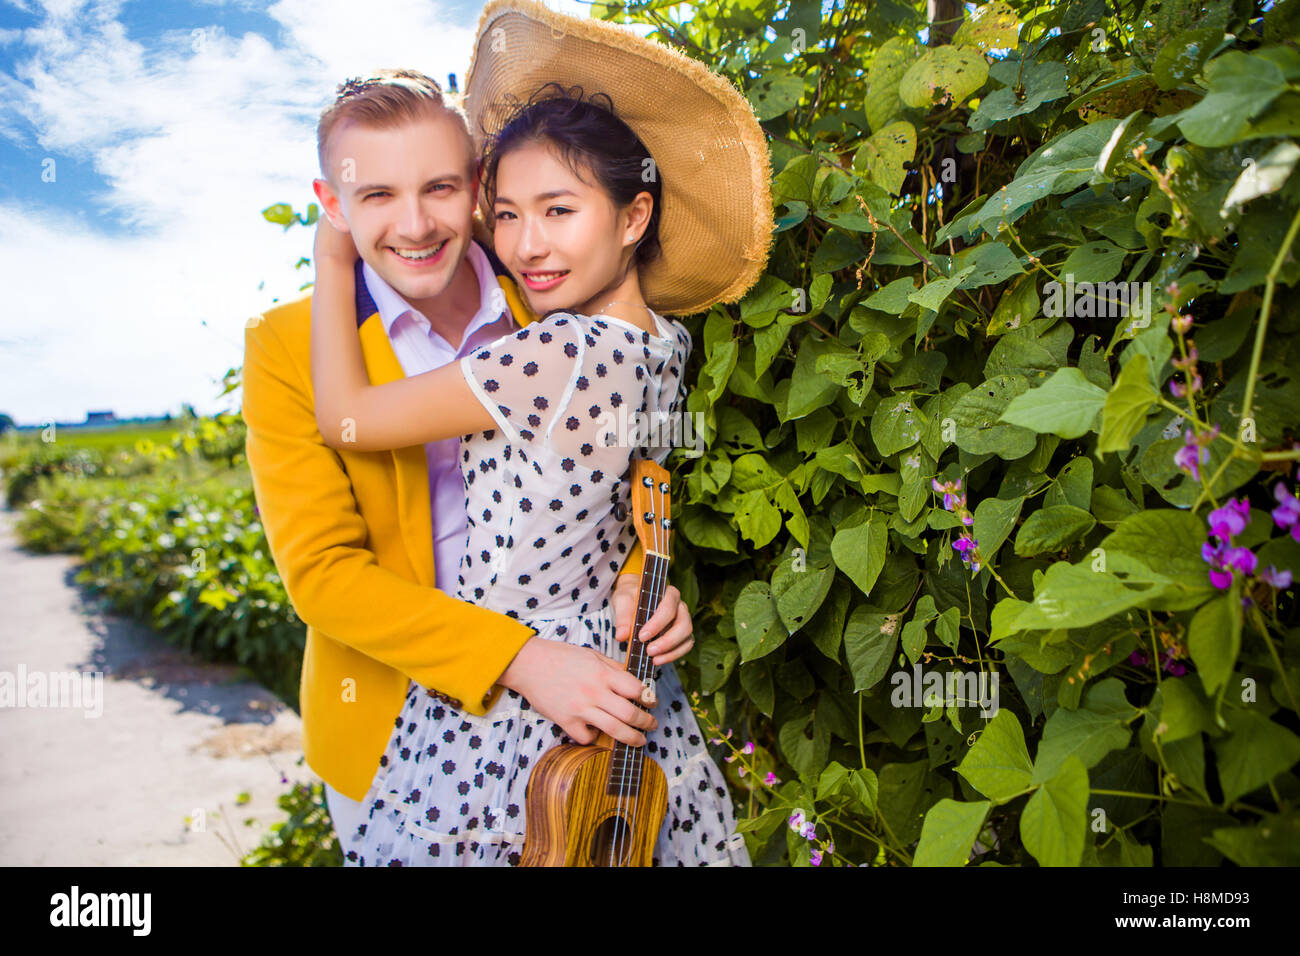 Portrait of happy couple embracing by plants Stock Photo